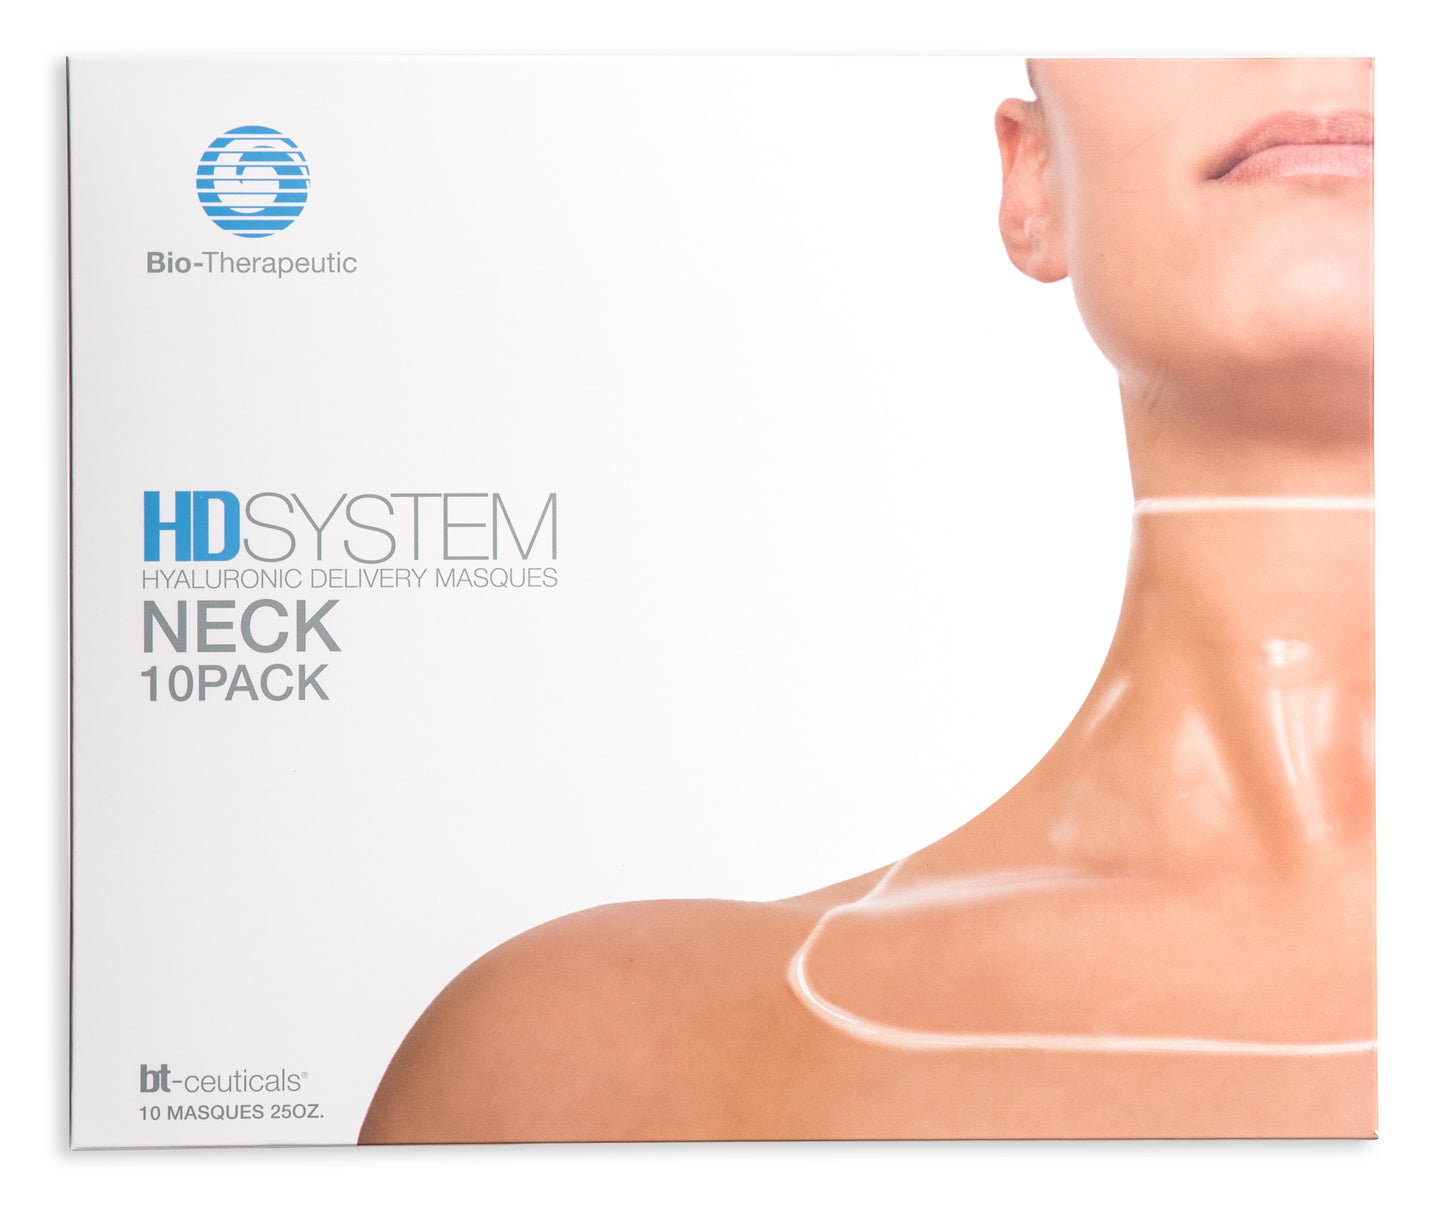 Hyaluronic Delivery System Neck Masques 10 pack